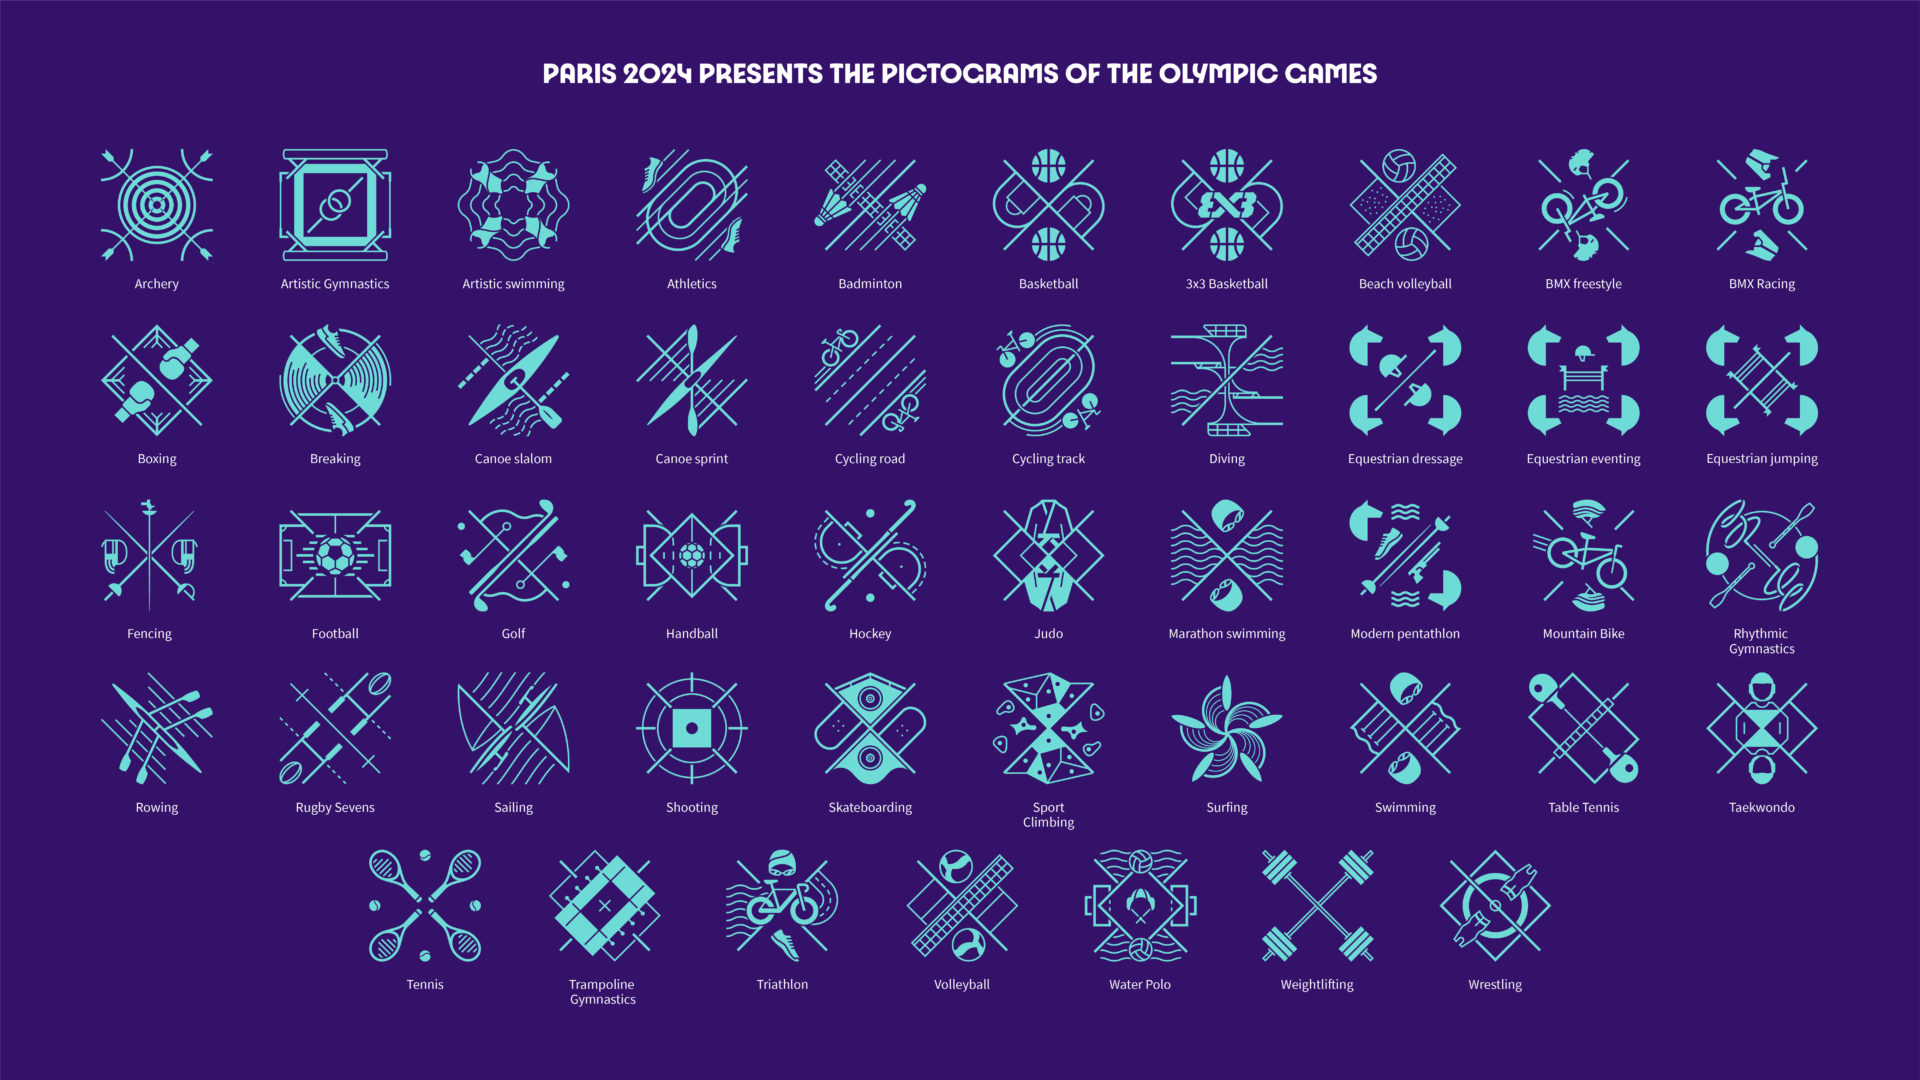 Paris 2024 Olympics Pictograph display on purple background.